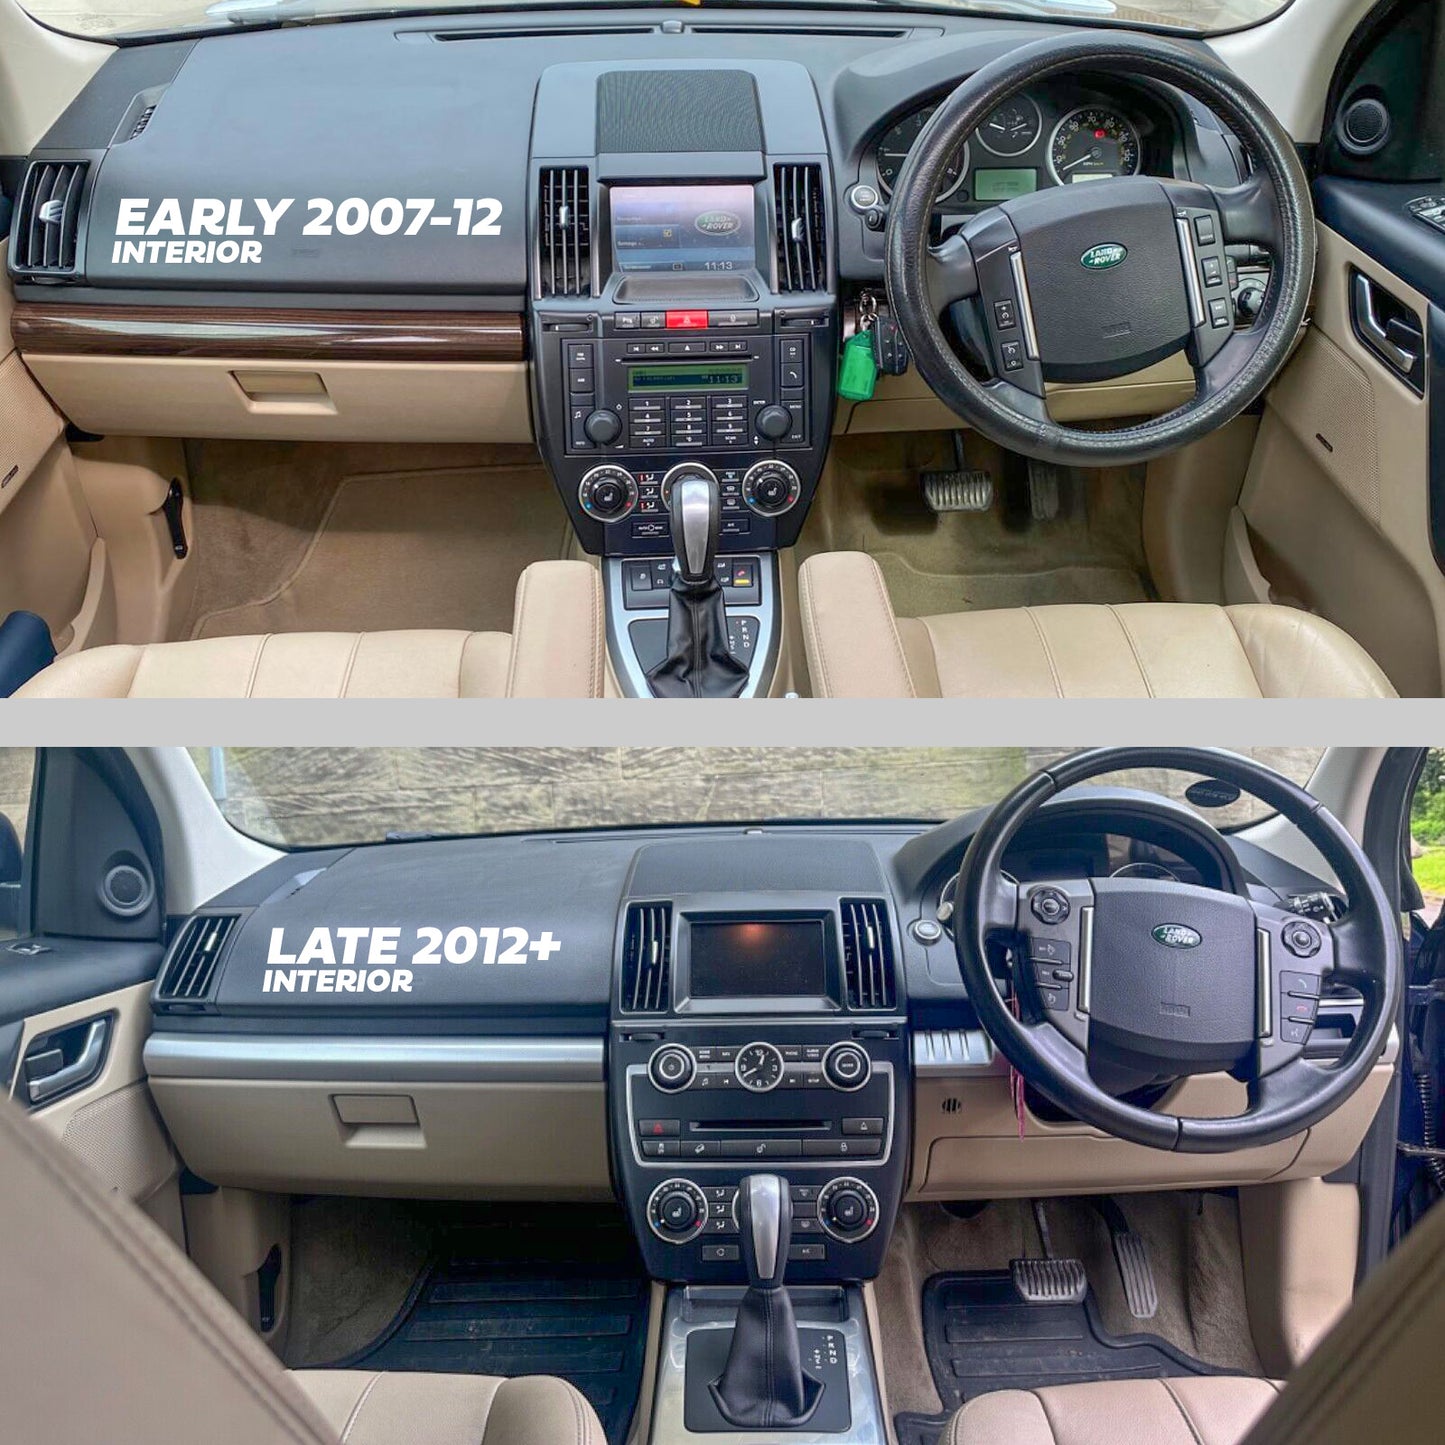 Overhead Console 'Dashcam' Power Tap-in Loom for Land Rover Freelander 2 (2012+)